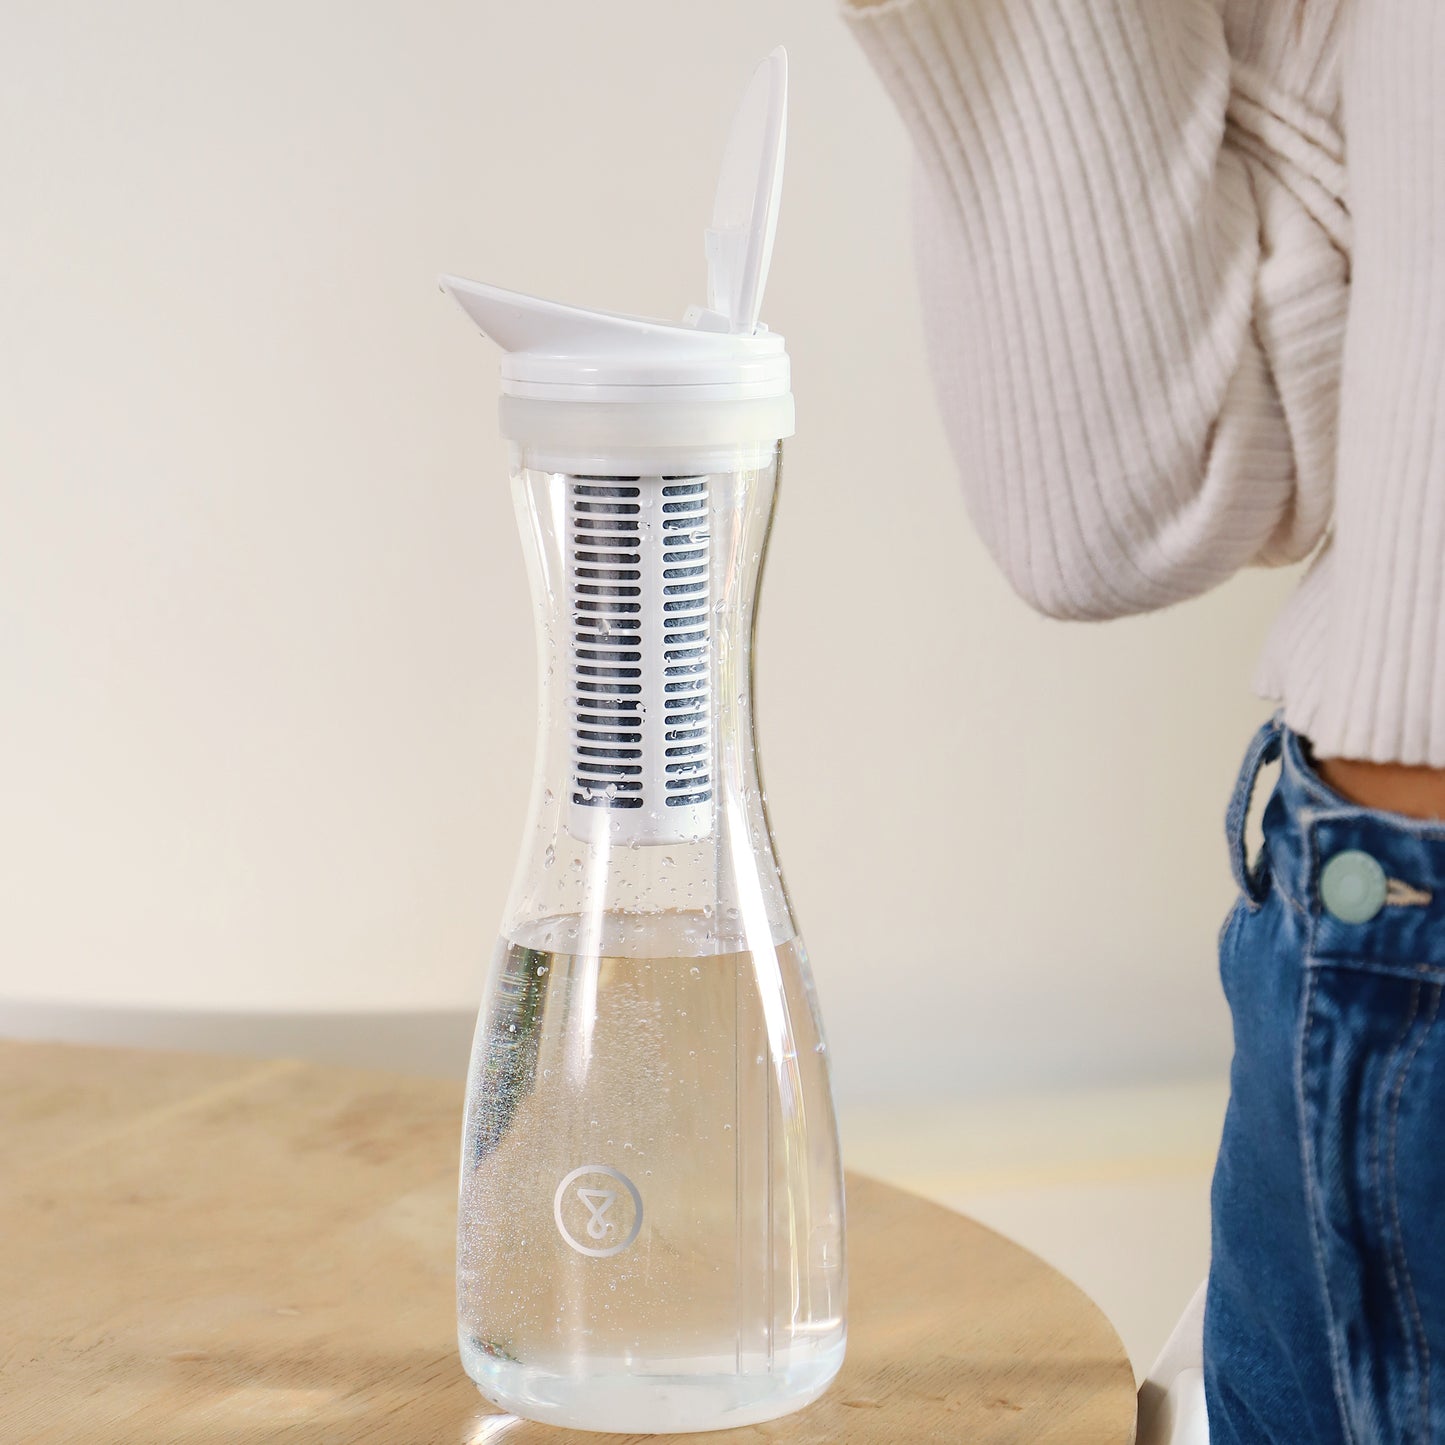 The Water Filter Jug